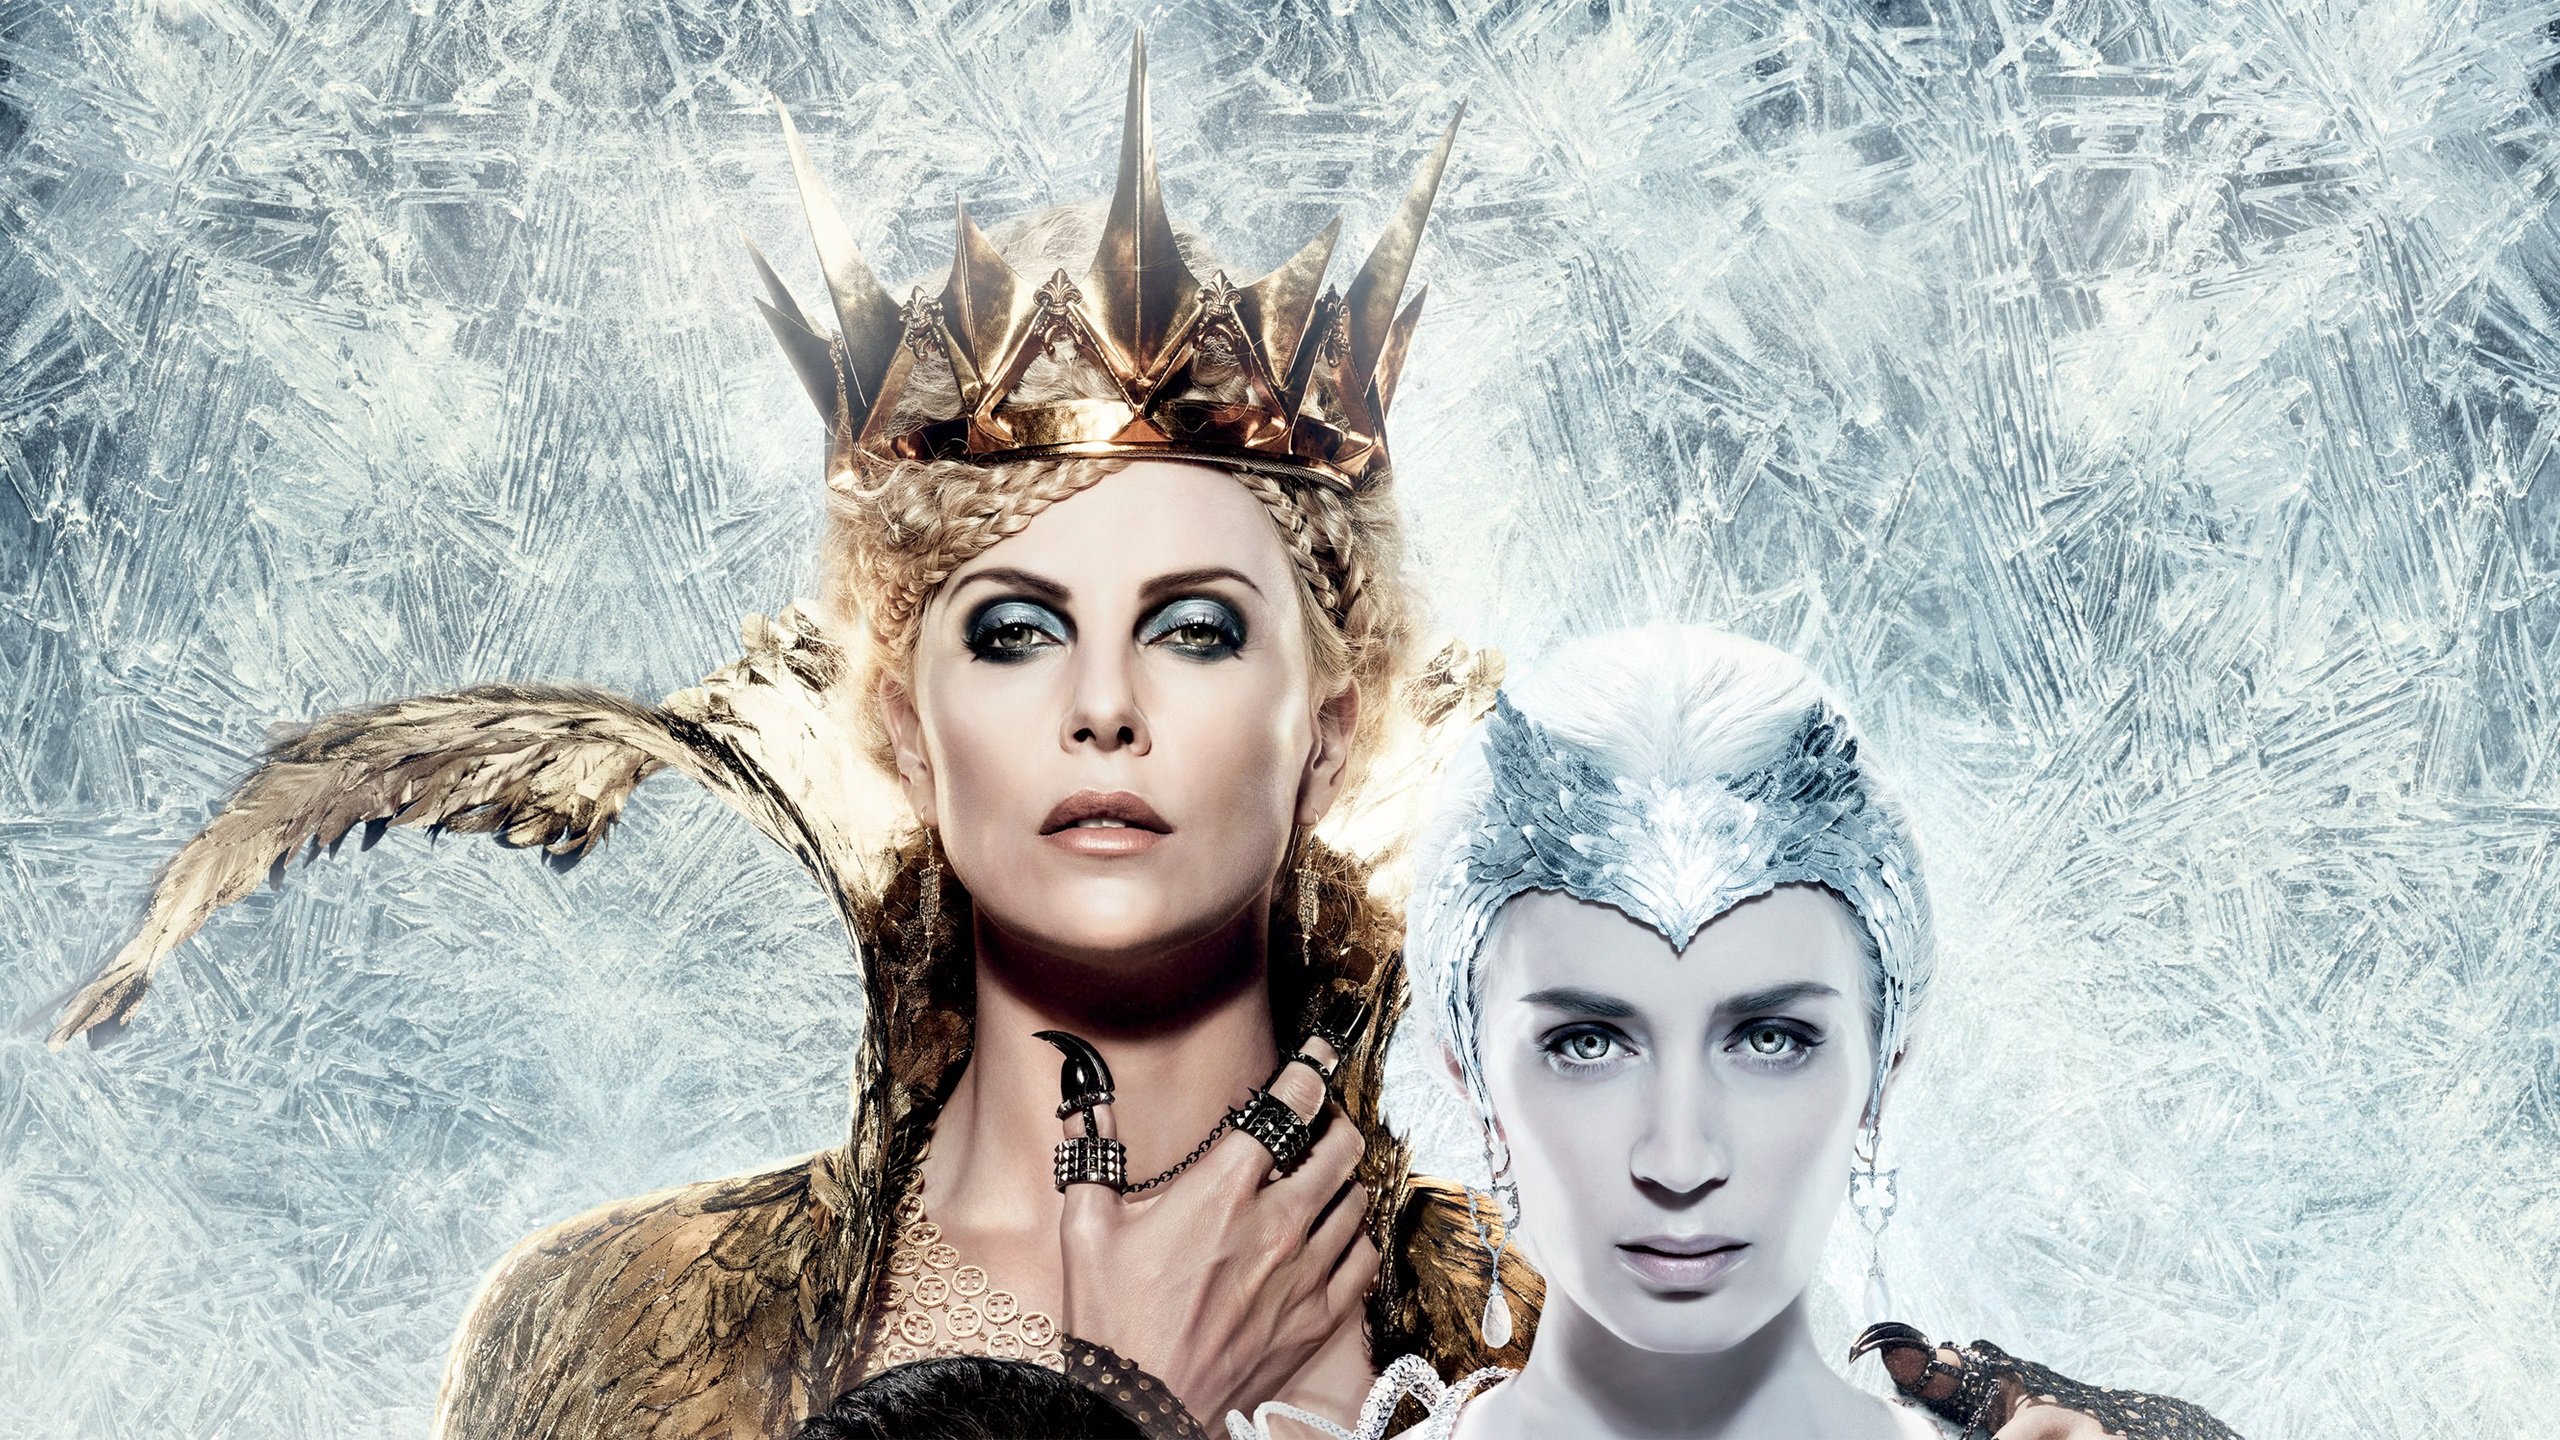 emily blunt, movie, the huntsman: winter's war, charlize theron